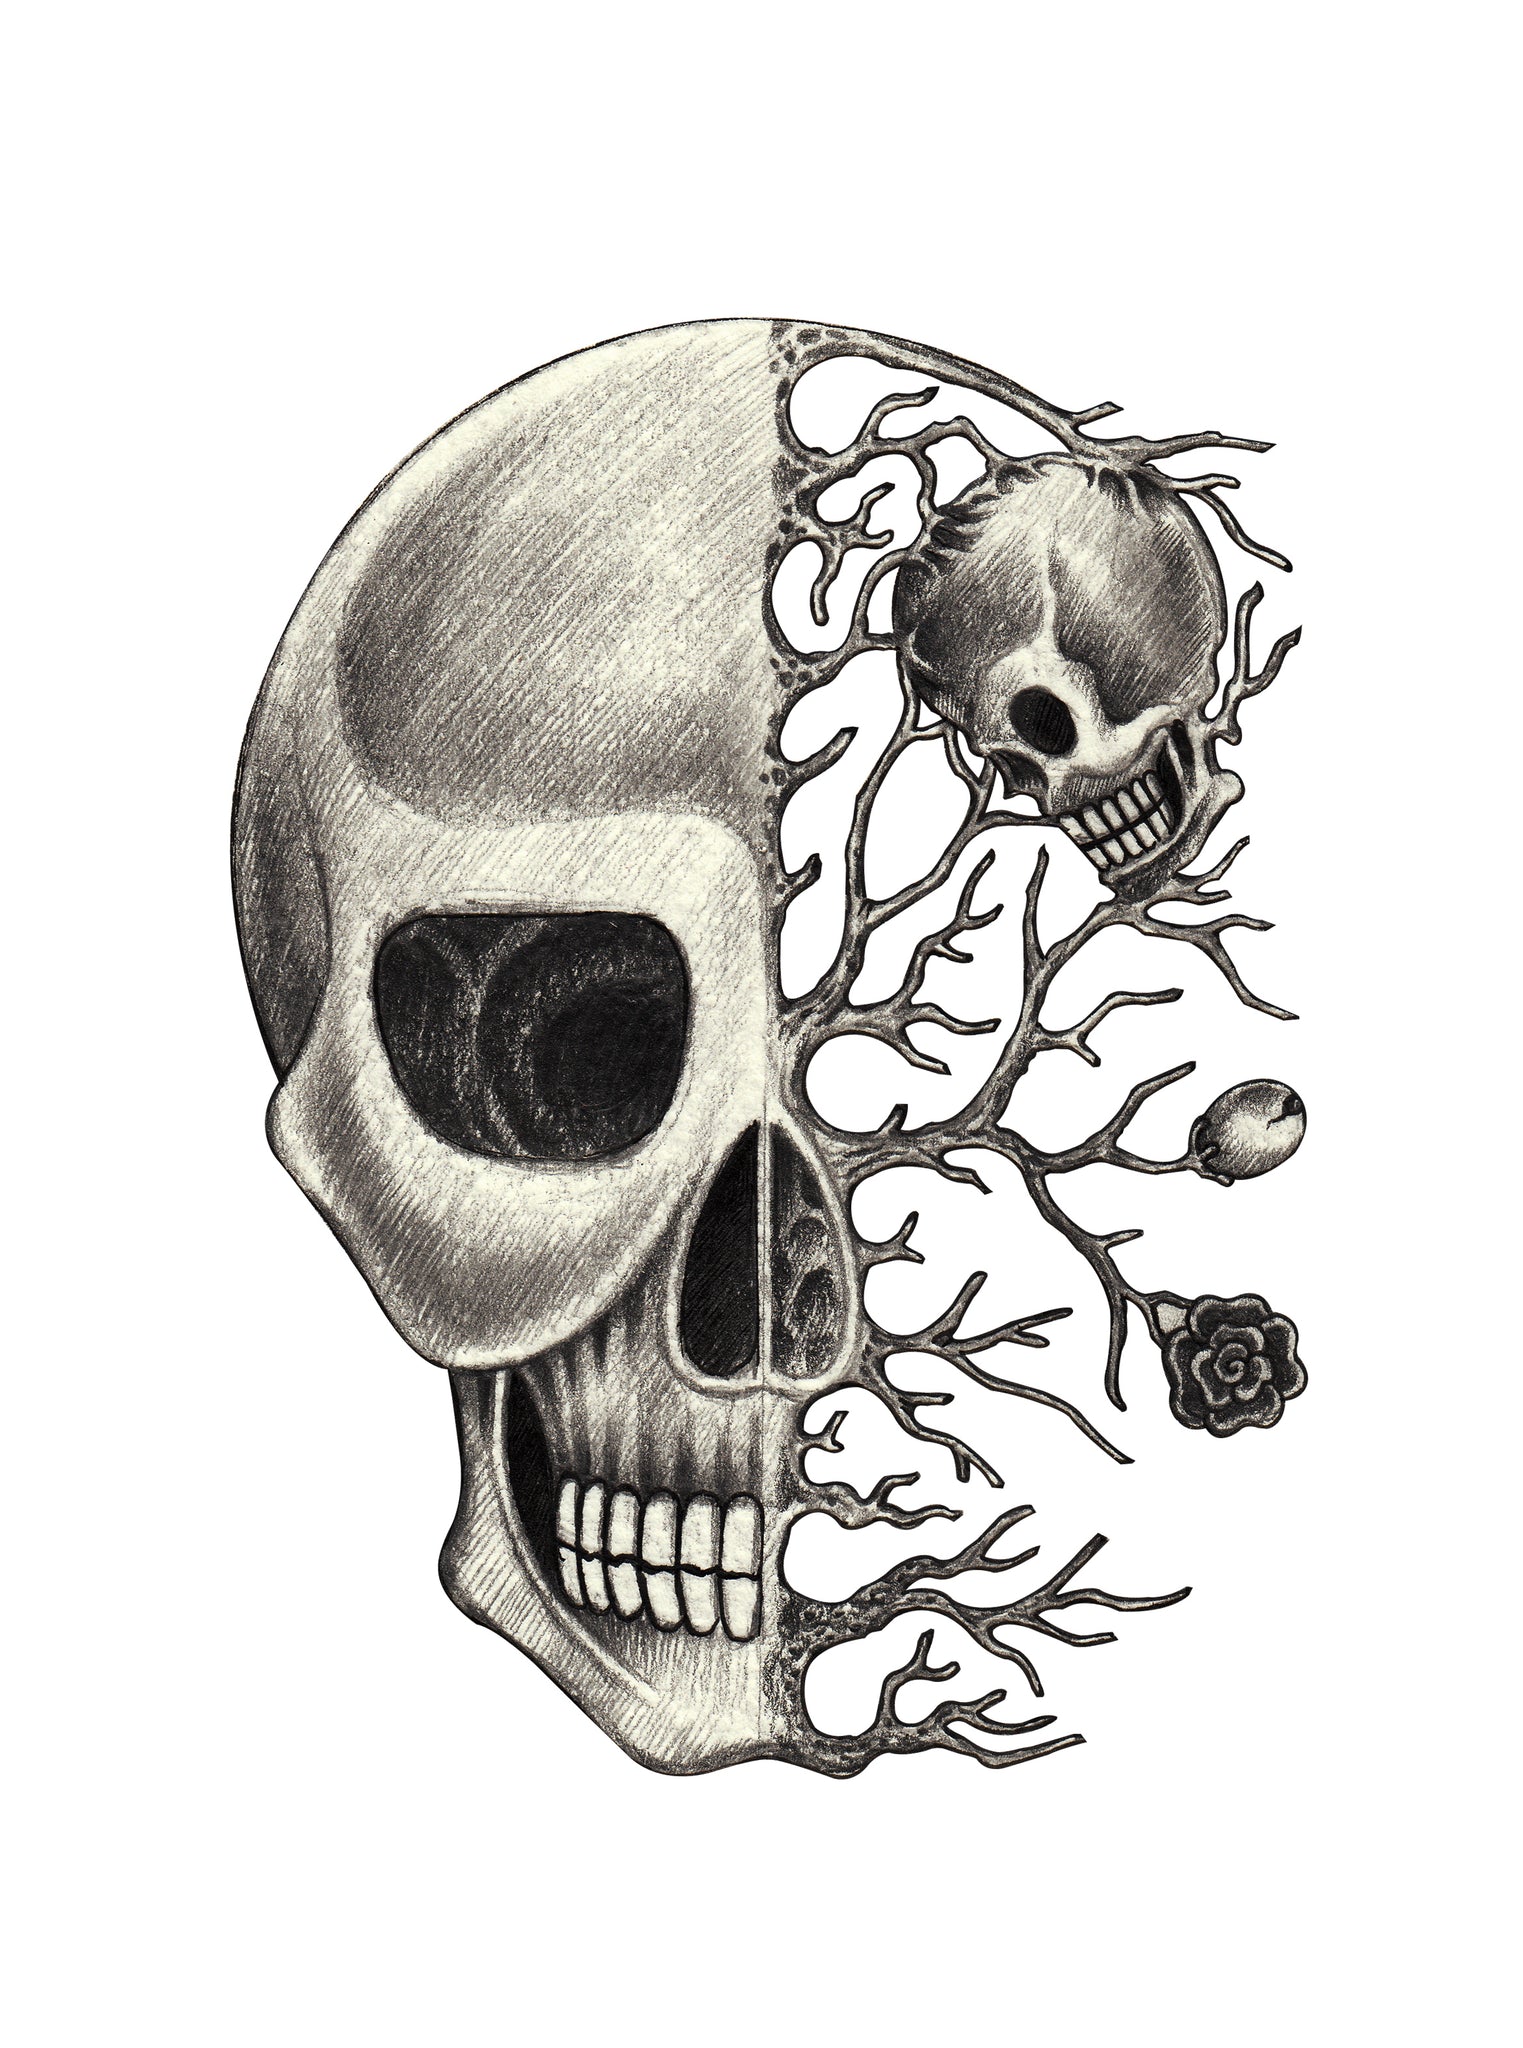 Pencil Sketch Half Skull with Branching Roots and Flower Vinyl Decal Sticker